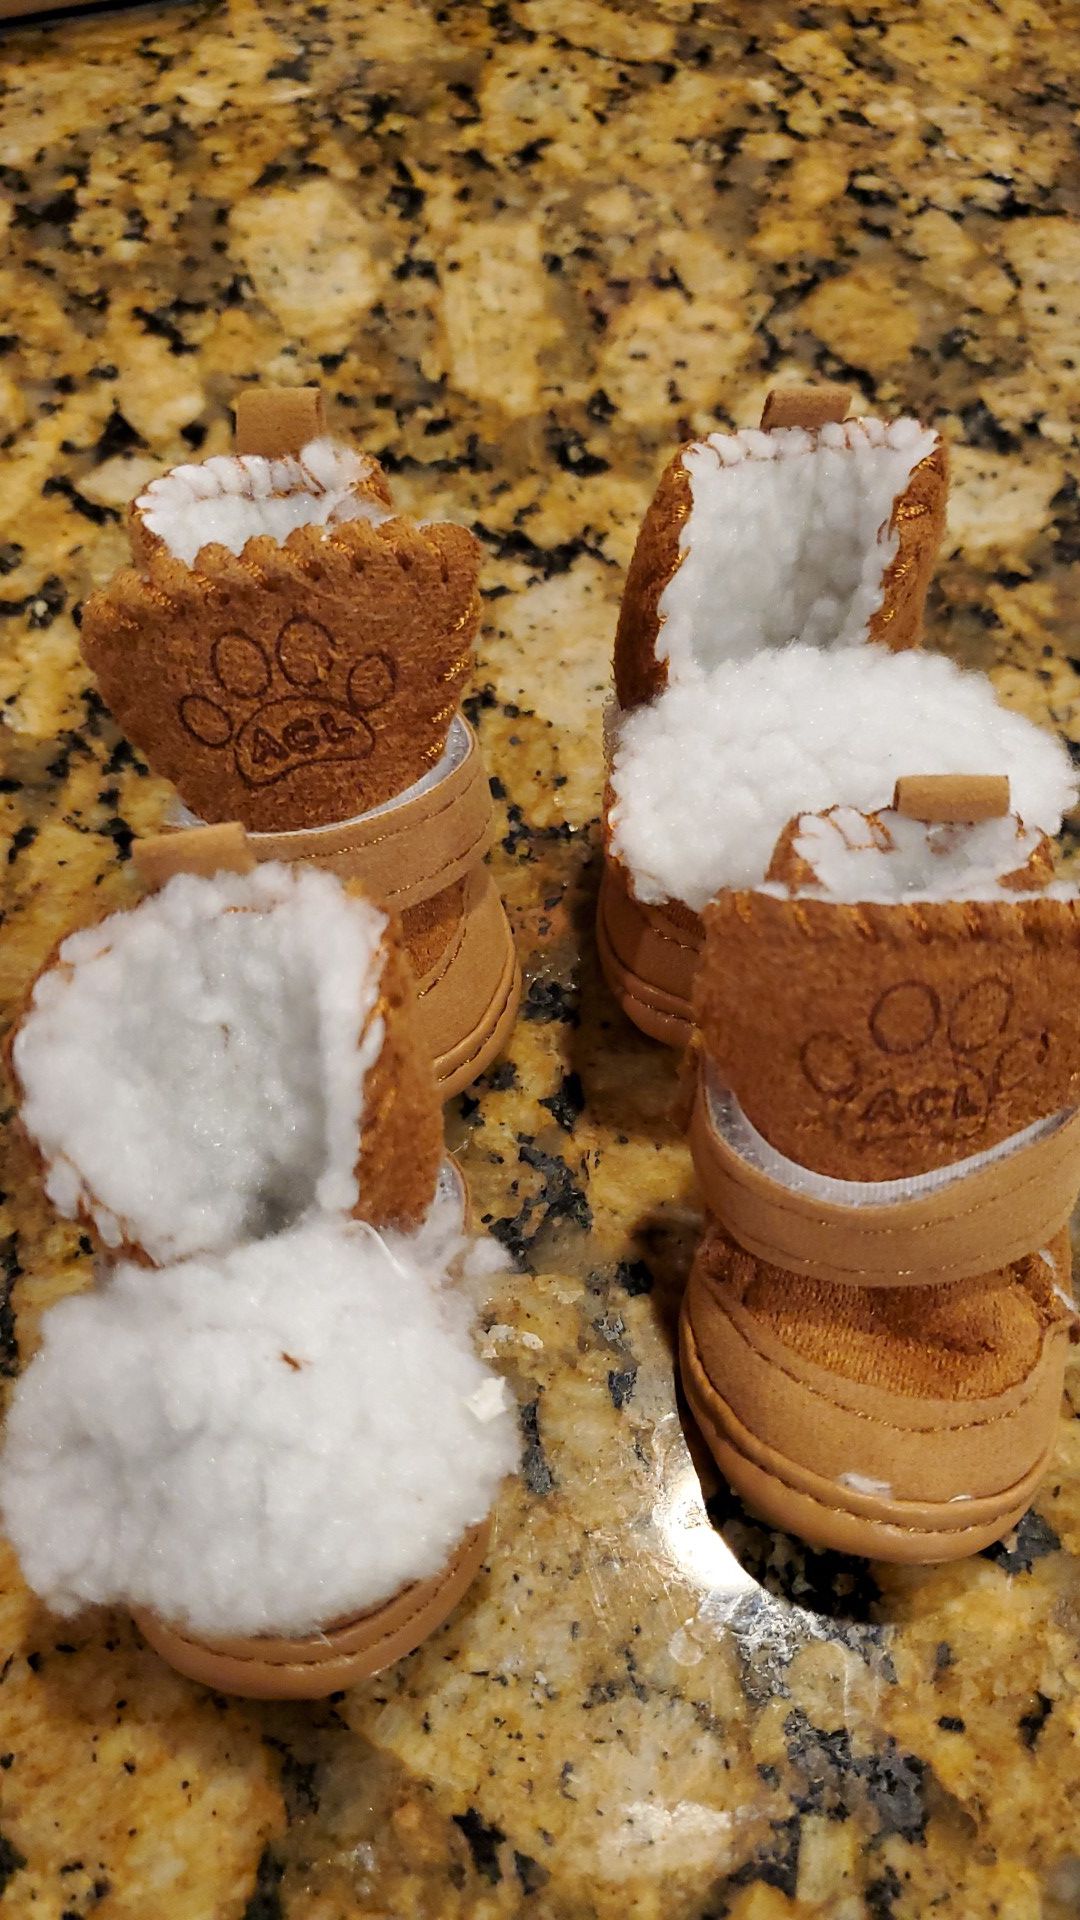 ACL Size 2 fluffy dog boots